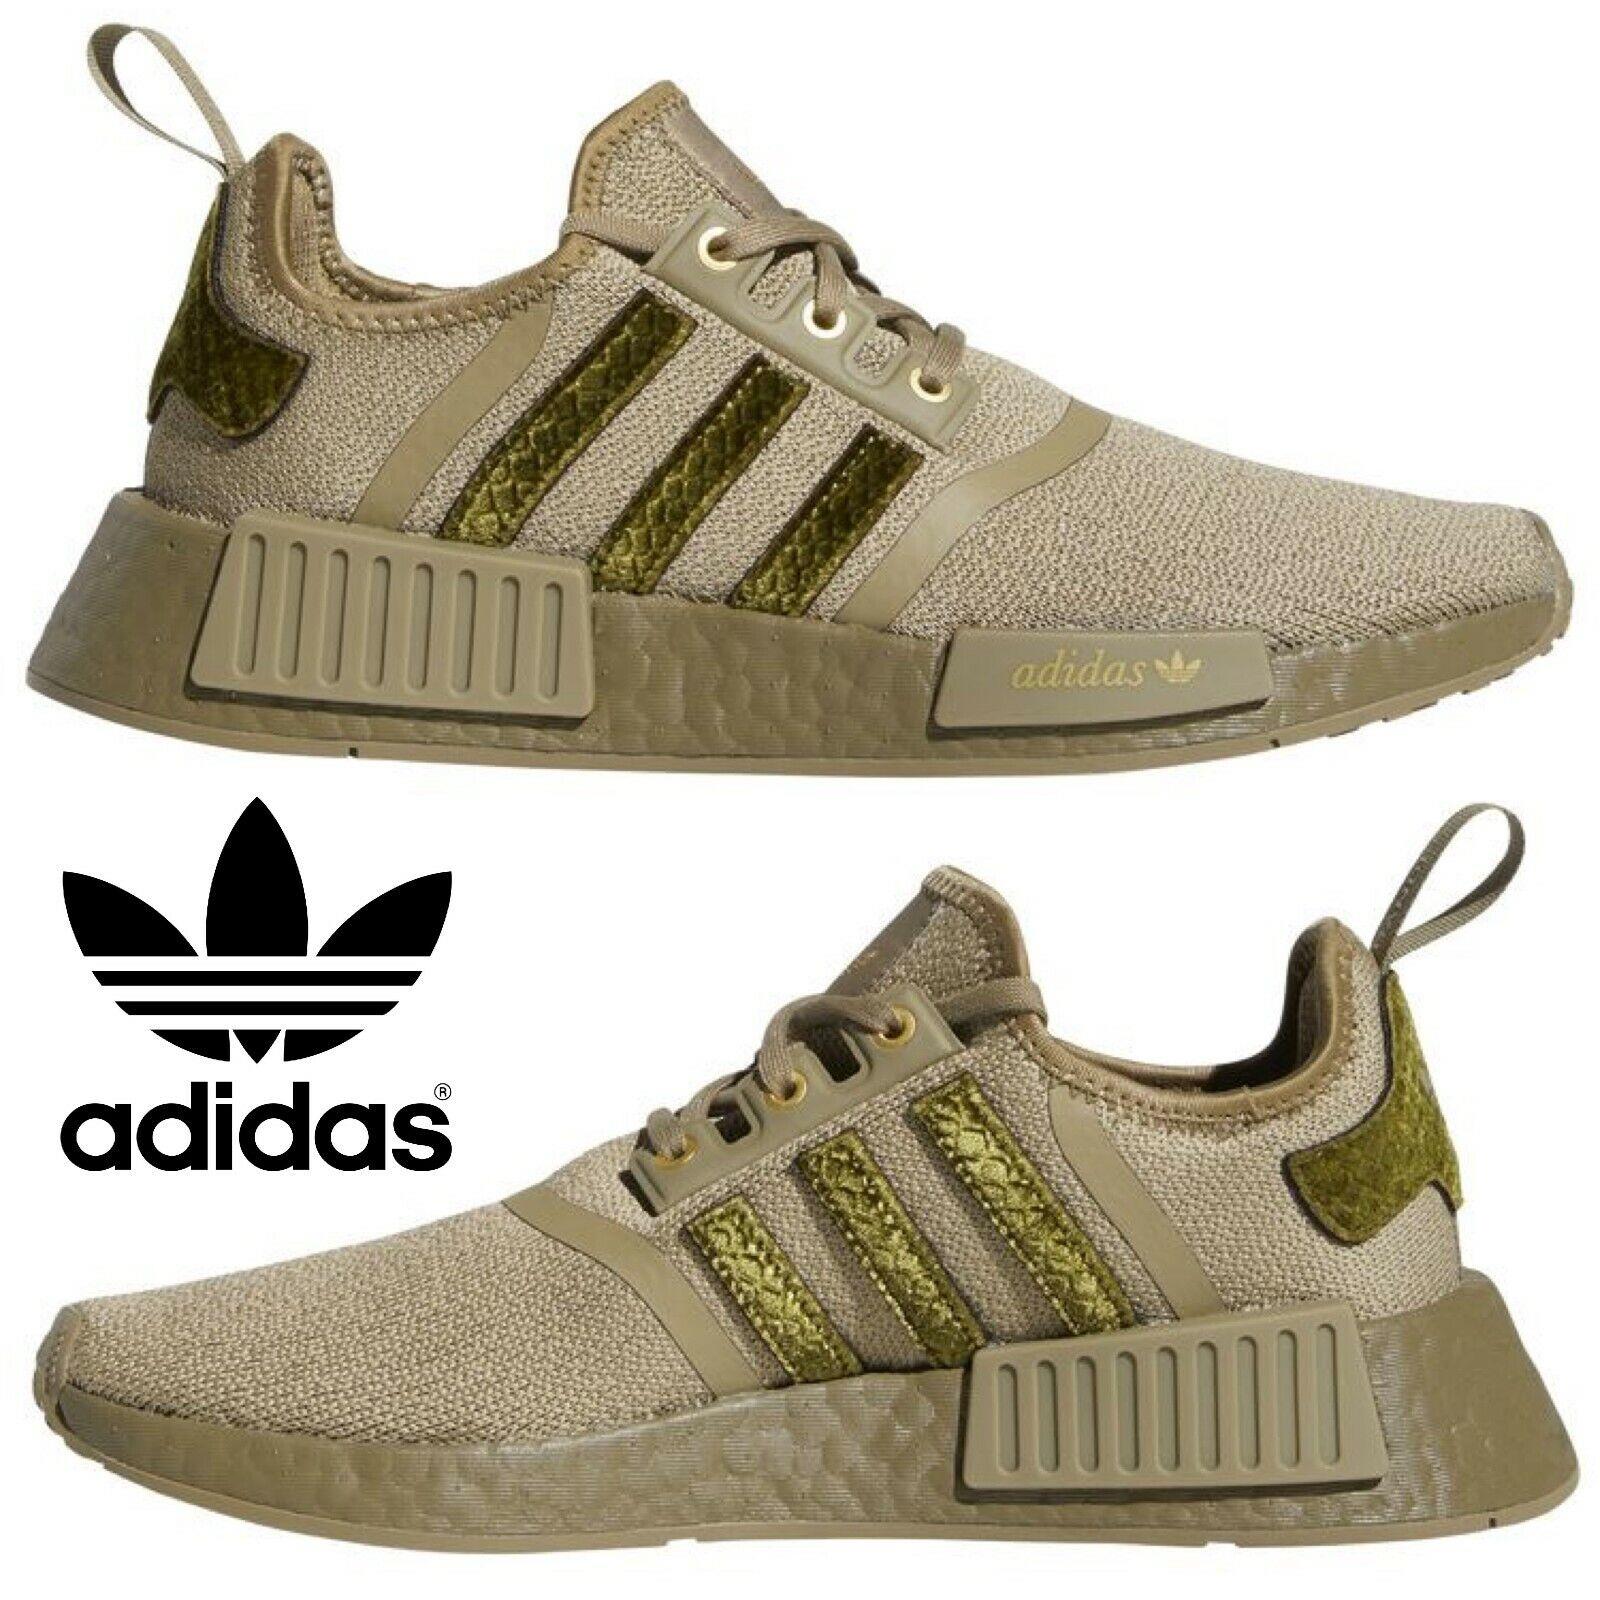 Adidas Originals Nmd R1 Women s Sneakers Casual Shoes Sport Gym Running - Green , Olive/Olive Manufacturer